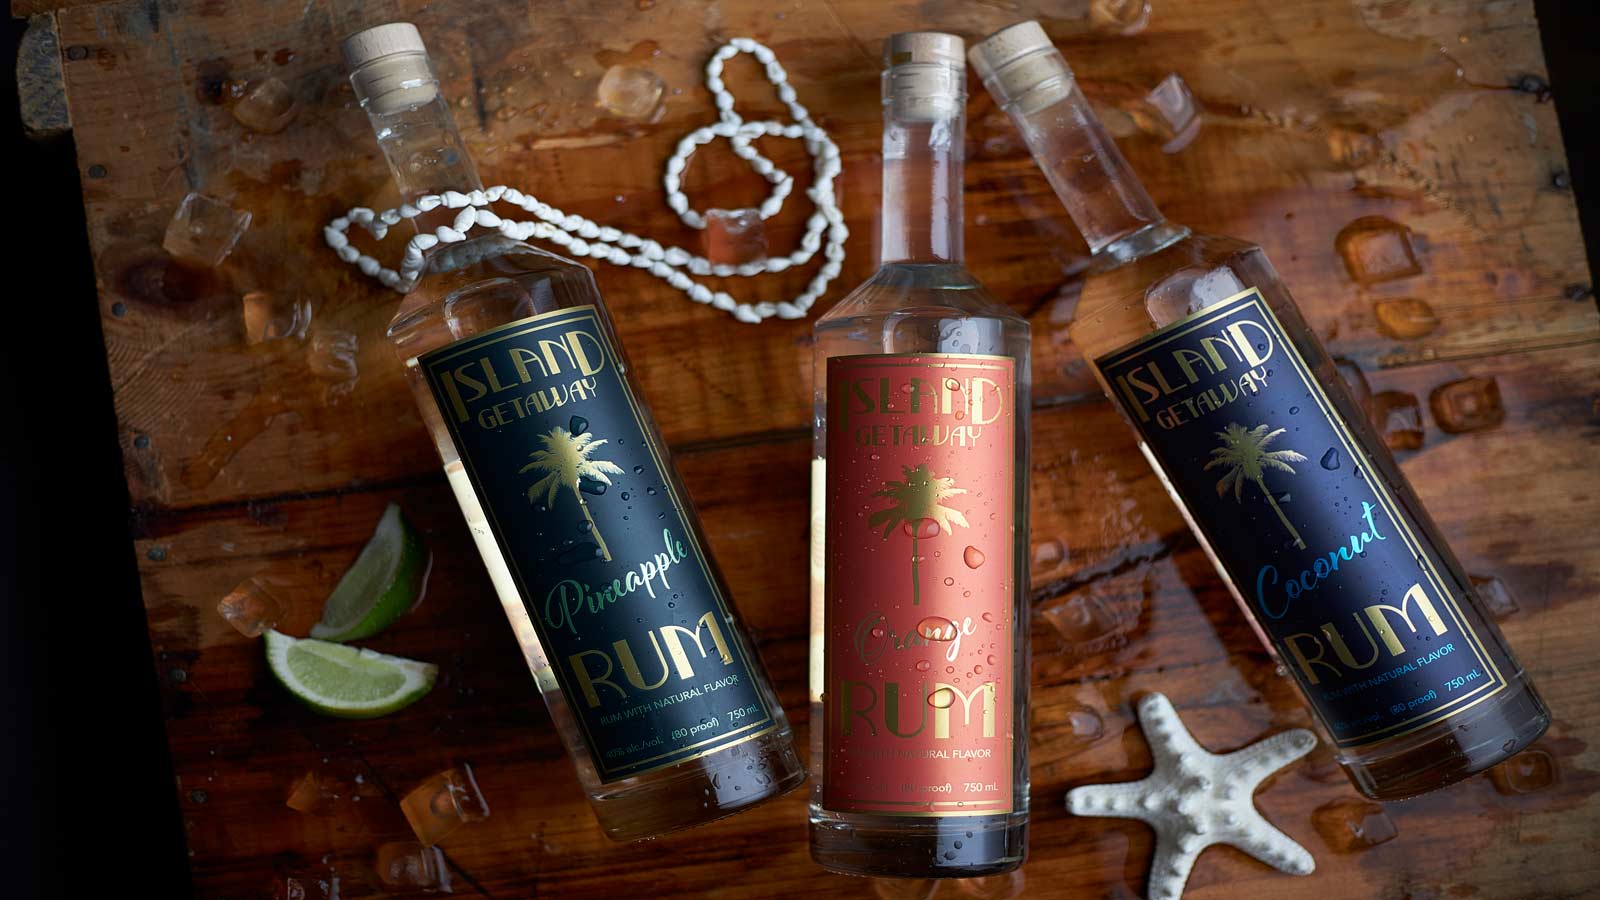 <p><strong>Address: 231 Frog Pond Lane, Dripping Springs, TX 78620</strong></p><p>This wouldn’t be a comprehensive list of distilleries if I failed to include a rum distiller, and how lucky is it that there is one in Dripping Springs? Formerly known as Hye Rum, <a href="https://www.islandgetawayrum.com/" rel="nofollow noopener">Island Getaway Rum</a> was founded in 2016 by Stephanie Houston and James Davidson.</p><p>After several years of studying and experimenting with rum processing, master distiller Davidson partnered with Houston, and together, they used their savings to rent a farmhouse in the small town of Hye, Texas, to set up production.</p><p>When talking about what makes their brand so special, Houston shared, “The distinctive flavors and aromas are derived from the unique combination of Louisiana sourced molasses, fermented with a secret blend of yeasts, and double distilled in a copper still, capturing the rich, bold flavors Island Getaway Rum is known for today.”</p><p>Although their tasting room is closed to the public as they move to full-time production of their five different varieties of Dark, White, Coconut, Orange, and Pineapple, lovers of this vibrant, Caribbean-inspired spirit can pick up a bottle at a nearby liquor store and impress their guests at their own tiki party. </p>